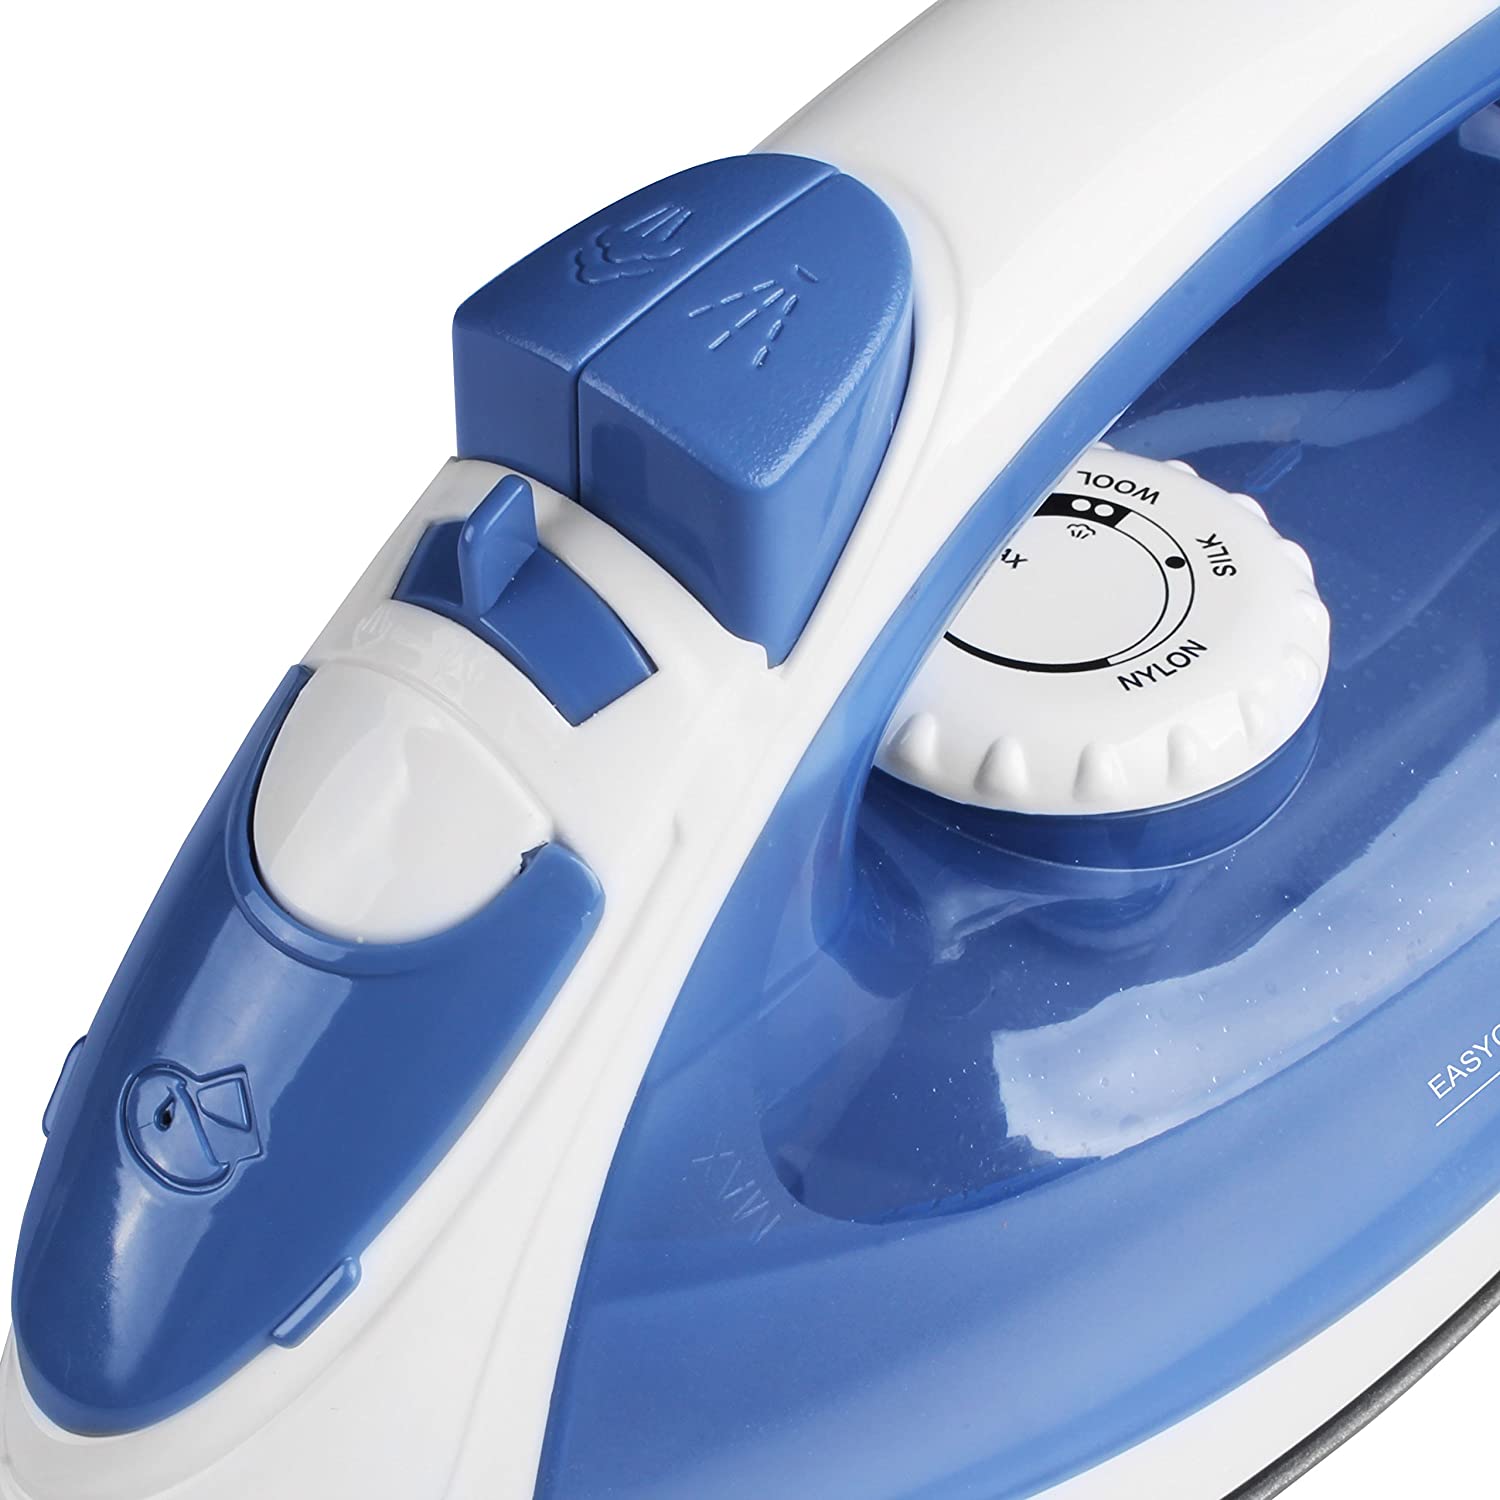 Utopia Home Steam Iron with Nonstick Soleplate - Small Size Lightweight - Best 